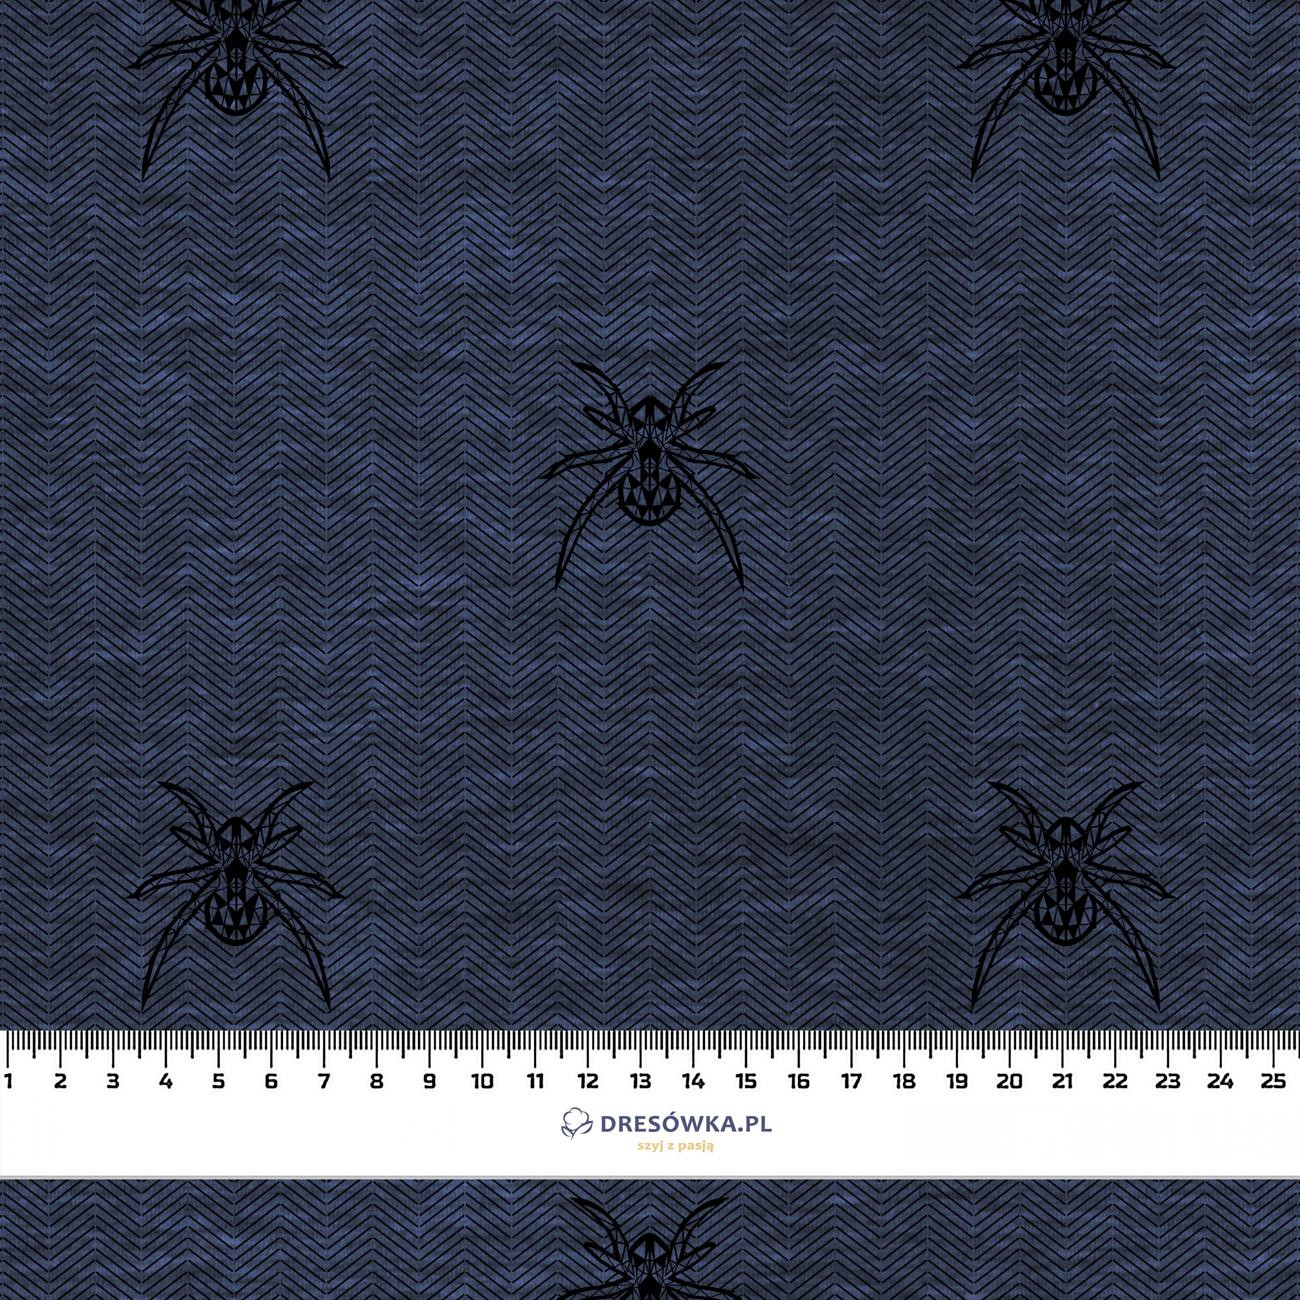 SPIDER / NIGHT CALL / jeans - Waterproof woven fabric